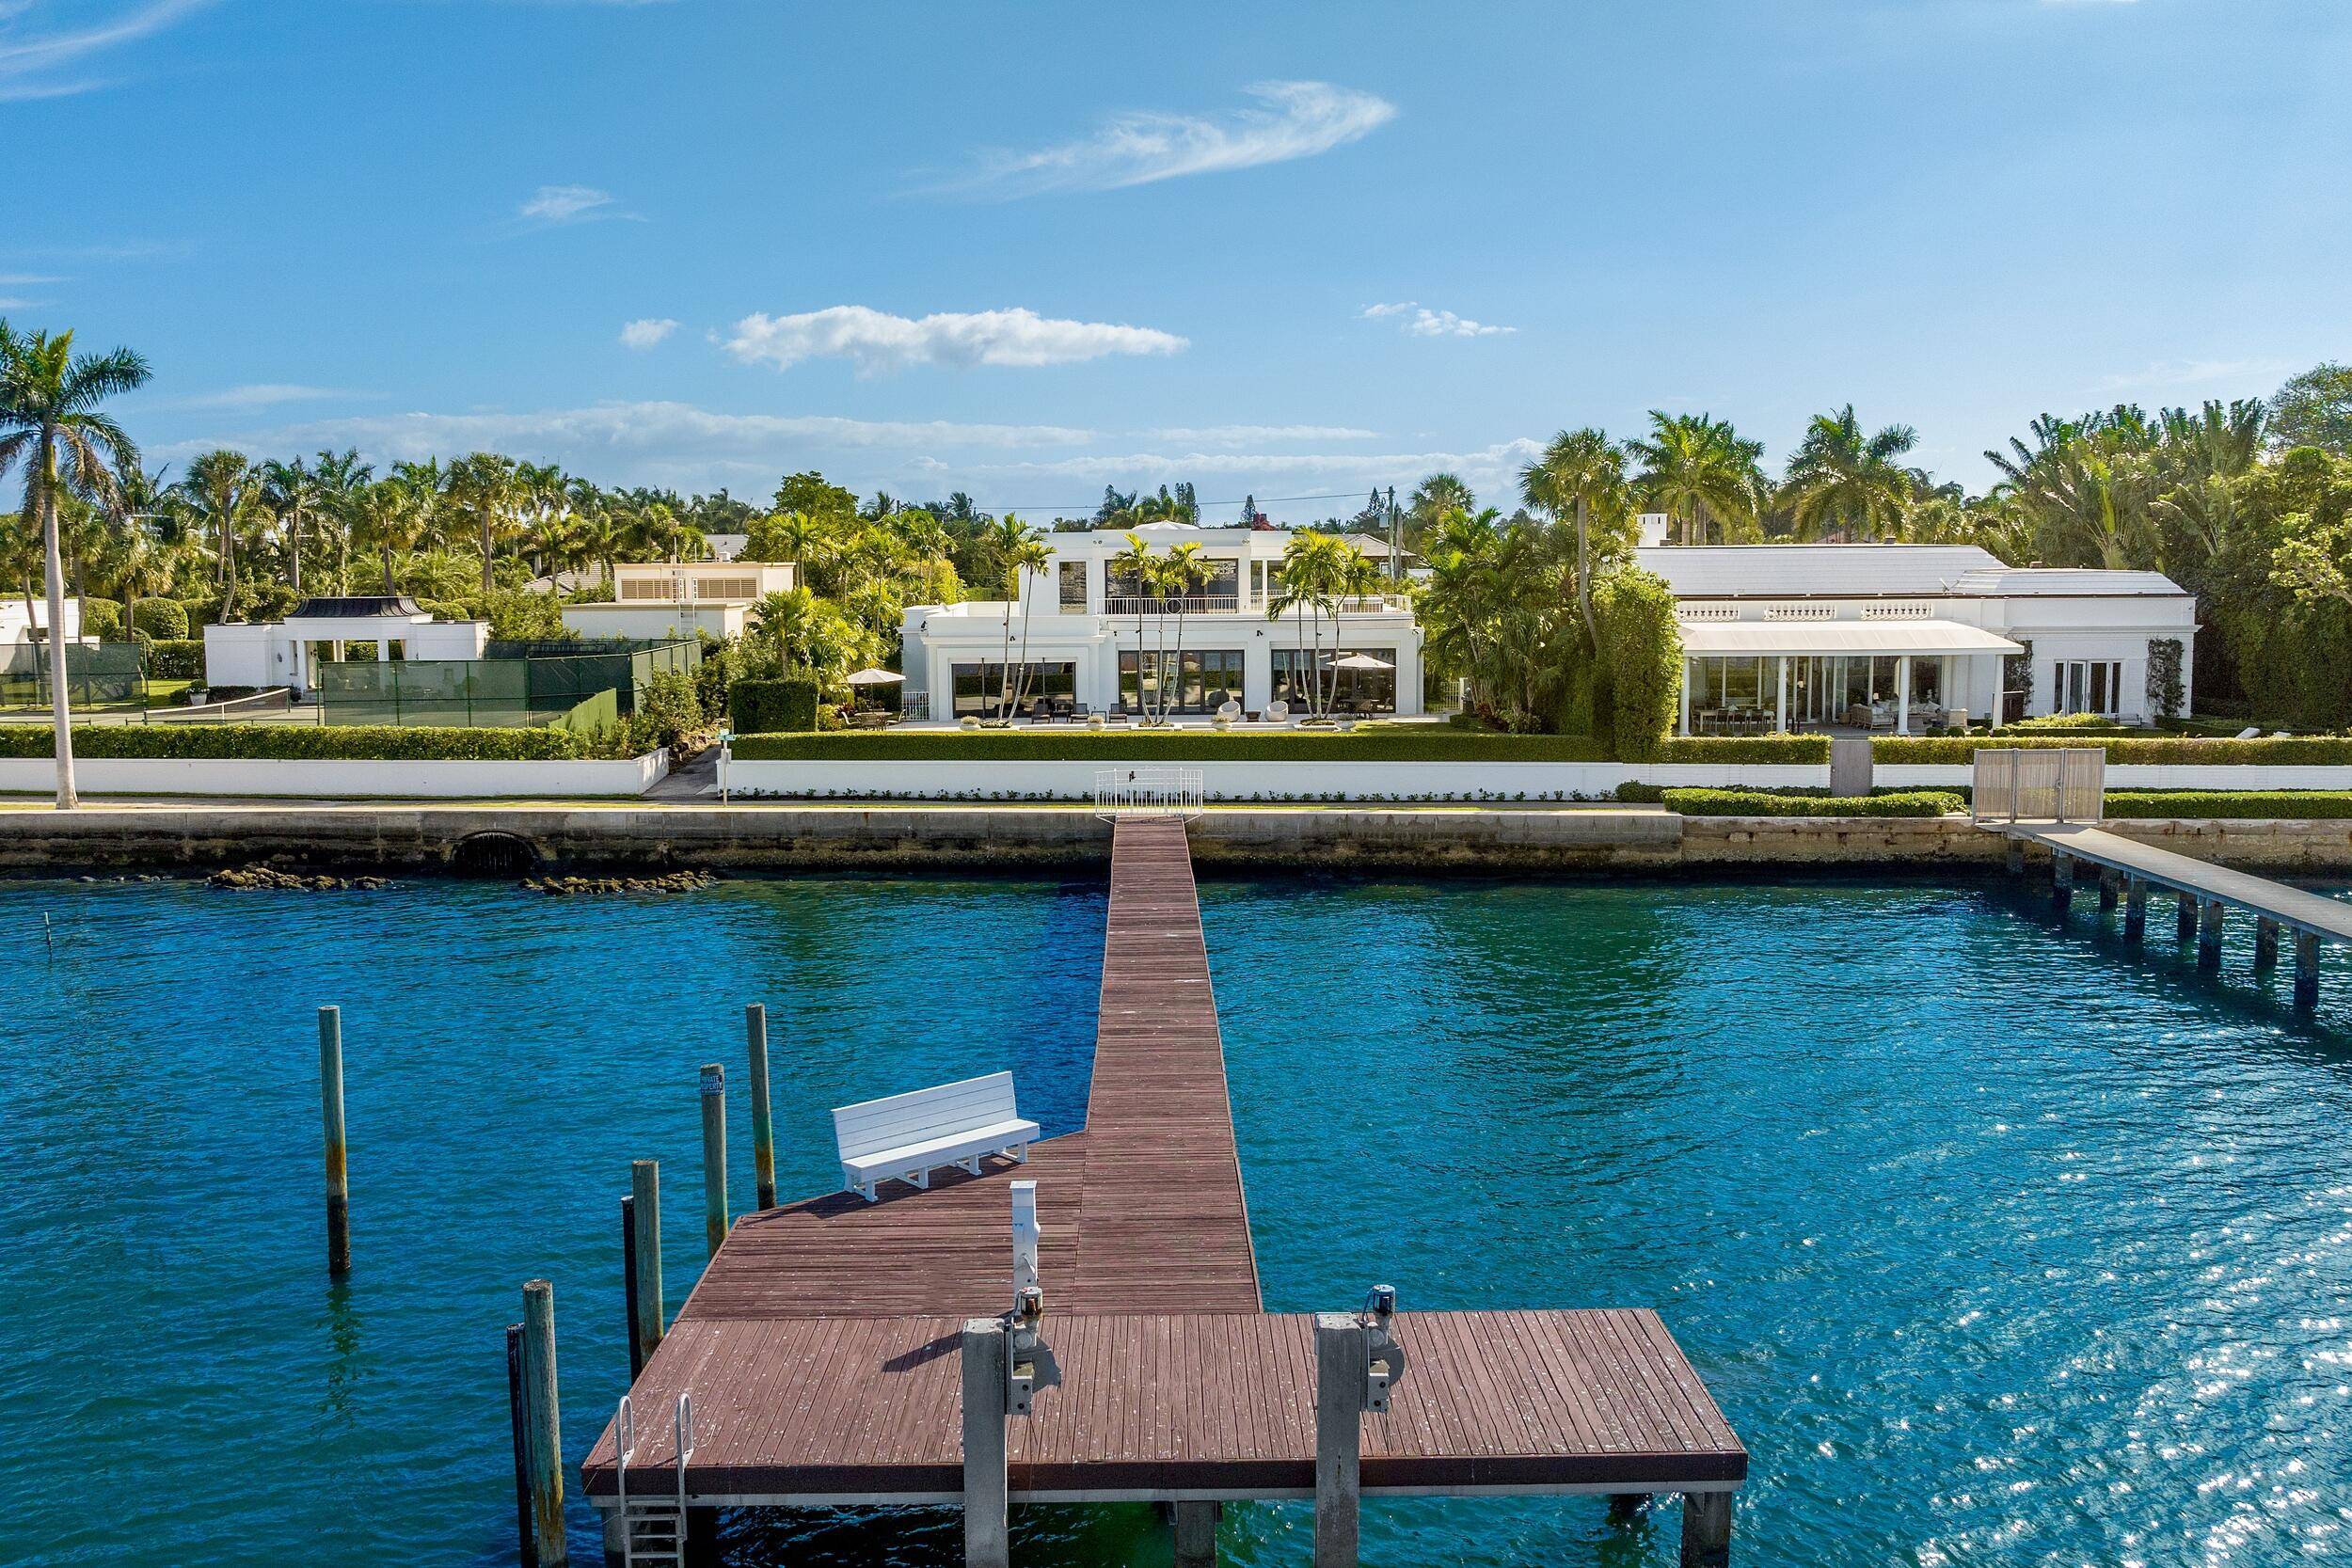 Stunning, contemporary regency with dramatic views of the Intracoastal waterway and the motor yachts at Rybovich Marina.